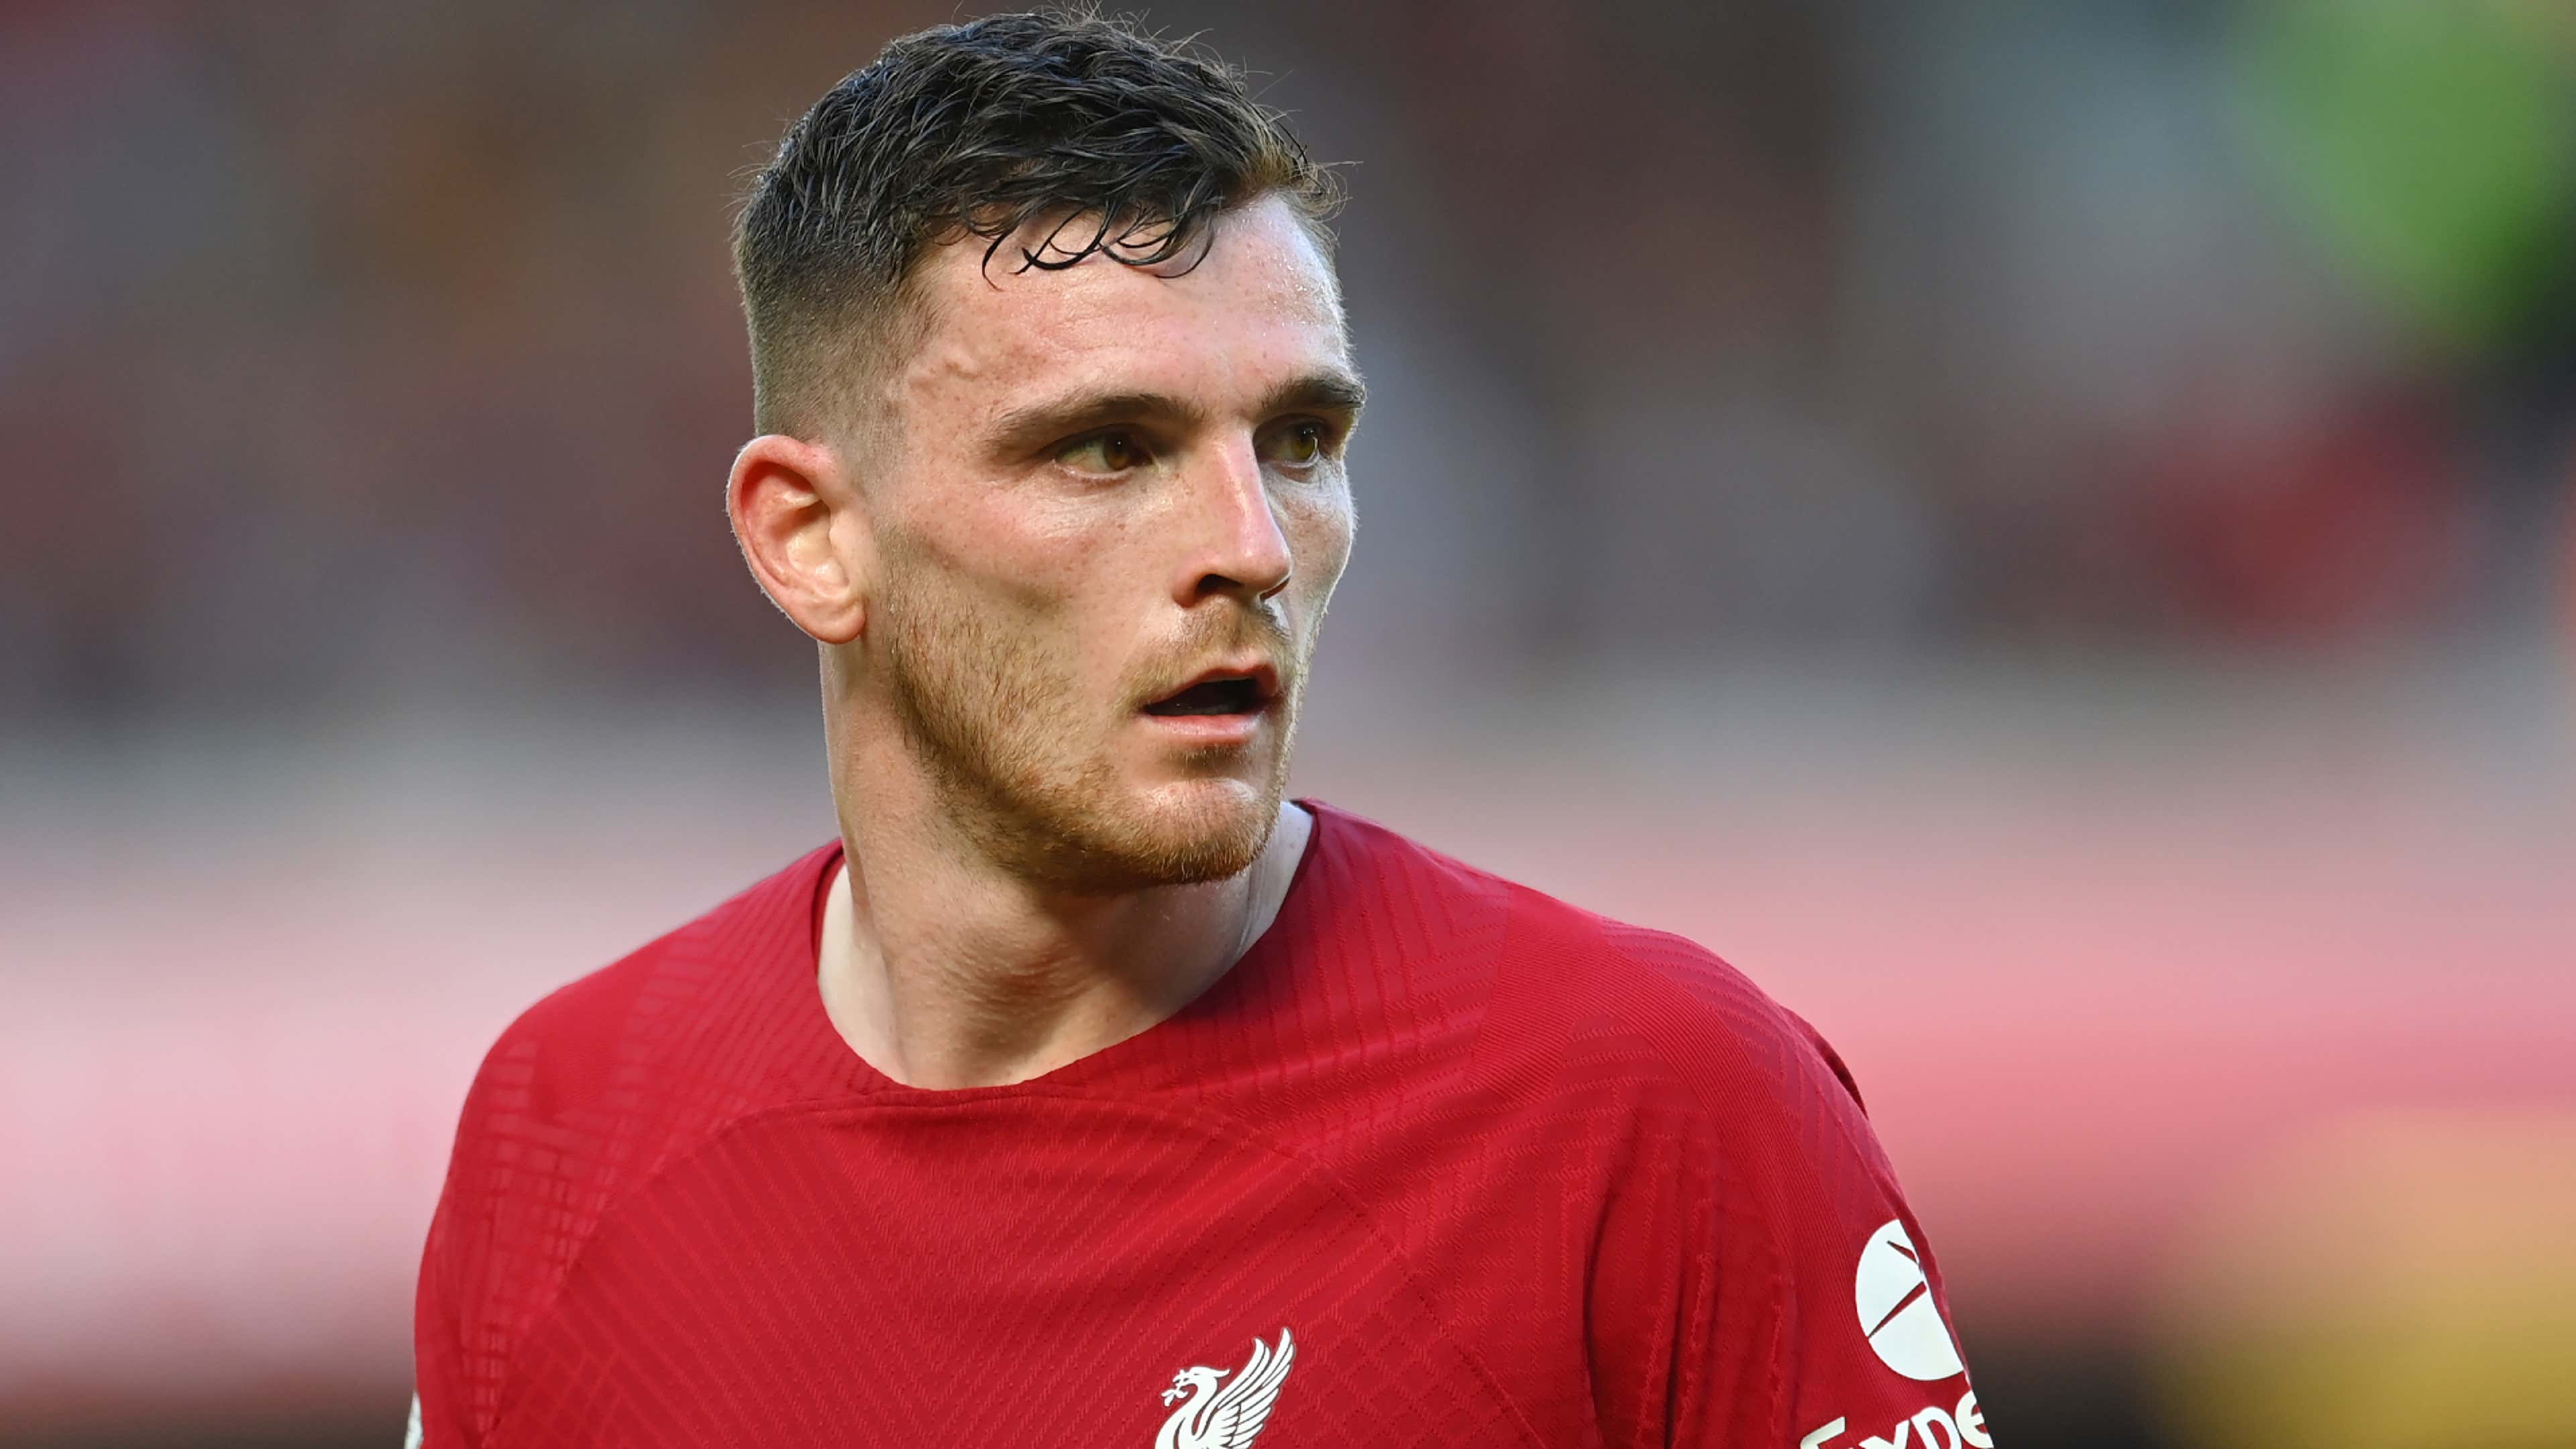 Robertson wants to follow Liverpool glory by reviving Scots